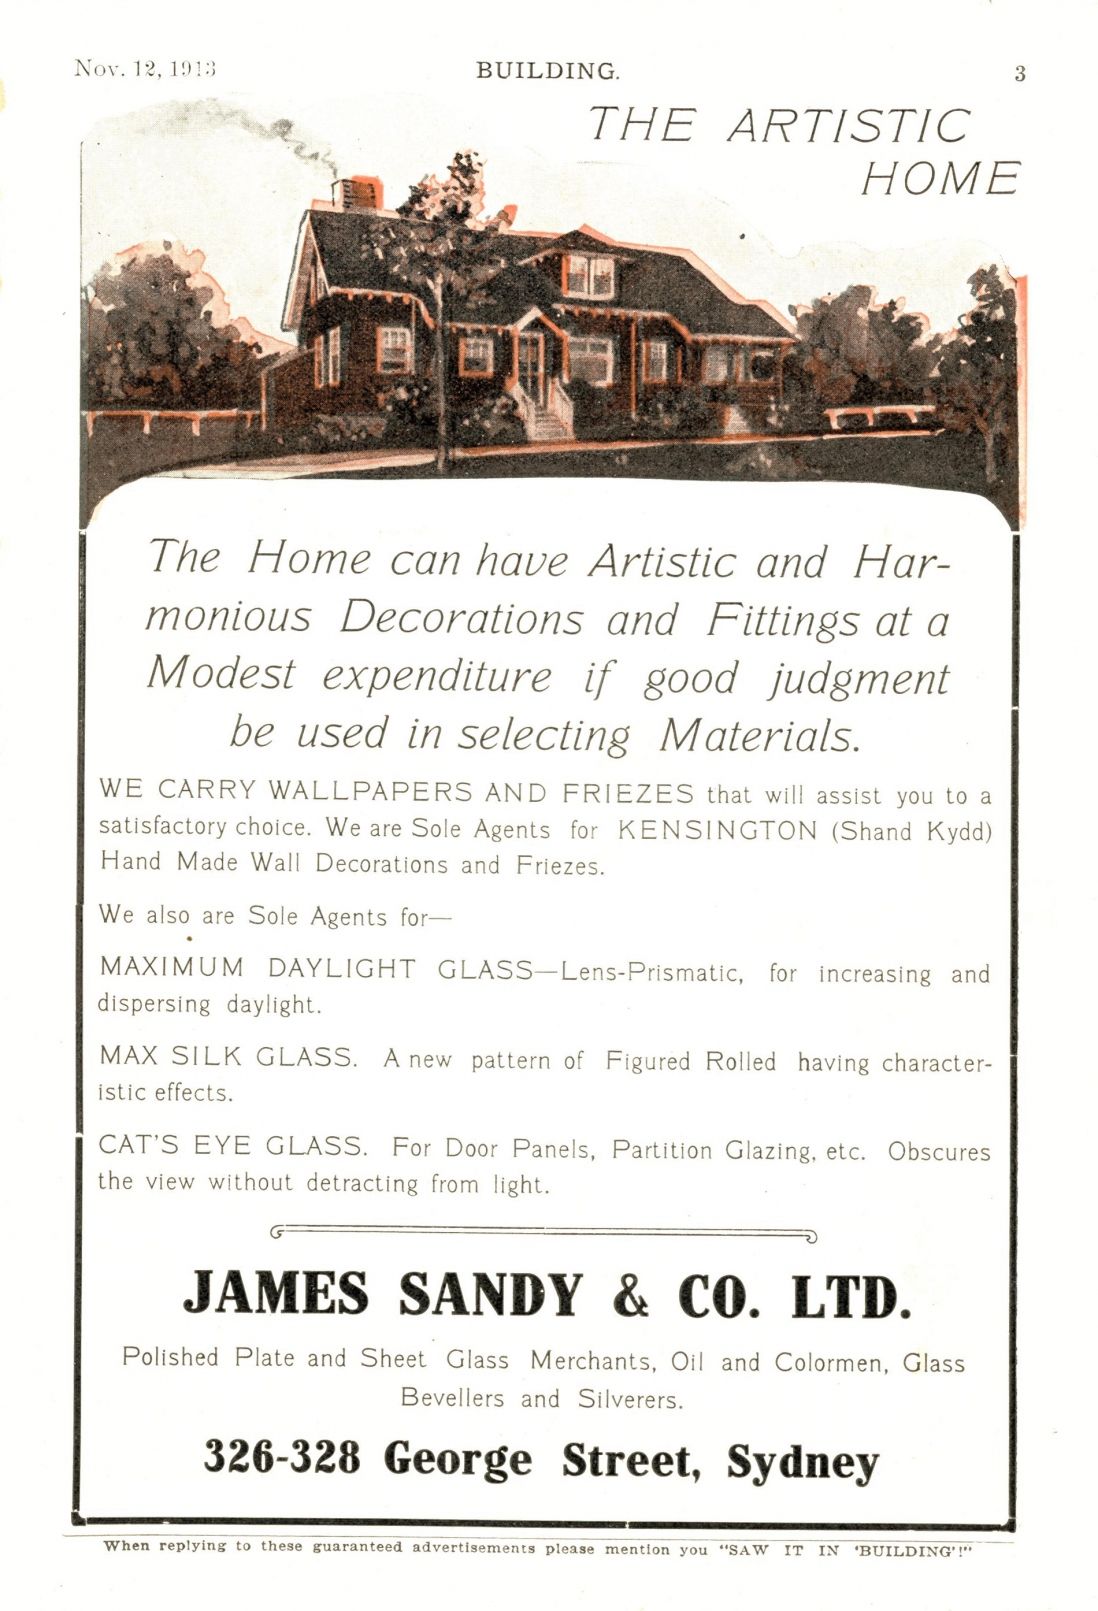 James Sandy advertisement  Advertisement for James Sandy & Co Ltd as featured in: Building: the magazine for the architect, builder, property owner & merchant, Building Publishing Co, Sydney, 12 Nov 1913.  The distributor of these glass samples, James Sandy & Co, began operations in 1872 and was soon retailing plate and sheet glass, paints and paint products, paperhangings and brushware. By the 1890s, James Sandy & Co advertised as 'artistic house decorators', and under the supervision of Fred Lidbury were responsible for the fit-out of numerous city buildings such as the Lyceum Theatre and the new bar at the Tattersall's Hotel. In 1894, the company acquired the stock of the Australian Glass Company followed by their works at Boronia Street Redfern and engaged in silvering, bevelling and glazing. James Sandy & Co had showrooms in various locations in George Street Sydney and a glass department in Ash Street. The Sandy family was involved in the management of the company up to at least 1931 when the firm's employees numbered 200. The company was broken up in 1961 though the firm’s name continued to be used into the 1970s.  Caroline Simpson Library & Research Collection, Museums of History NSW. periodicals 690.05 BUI